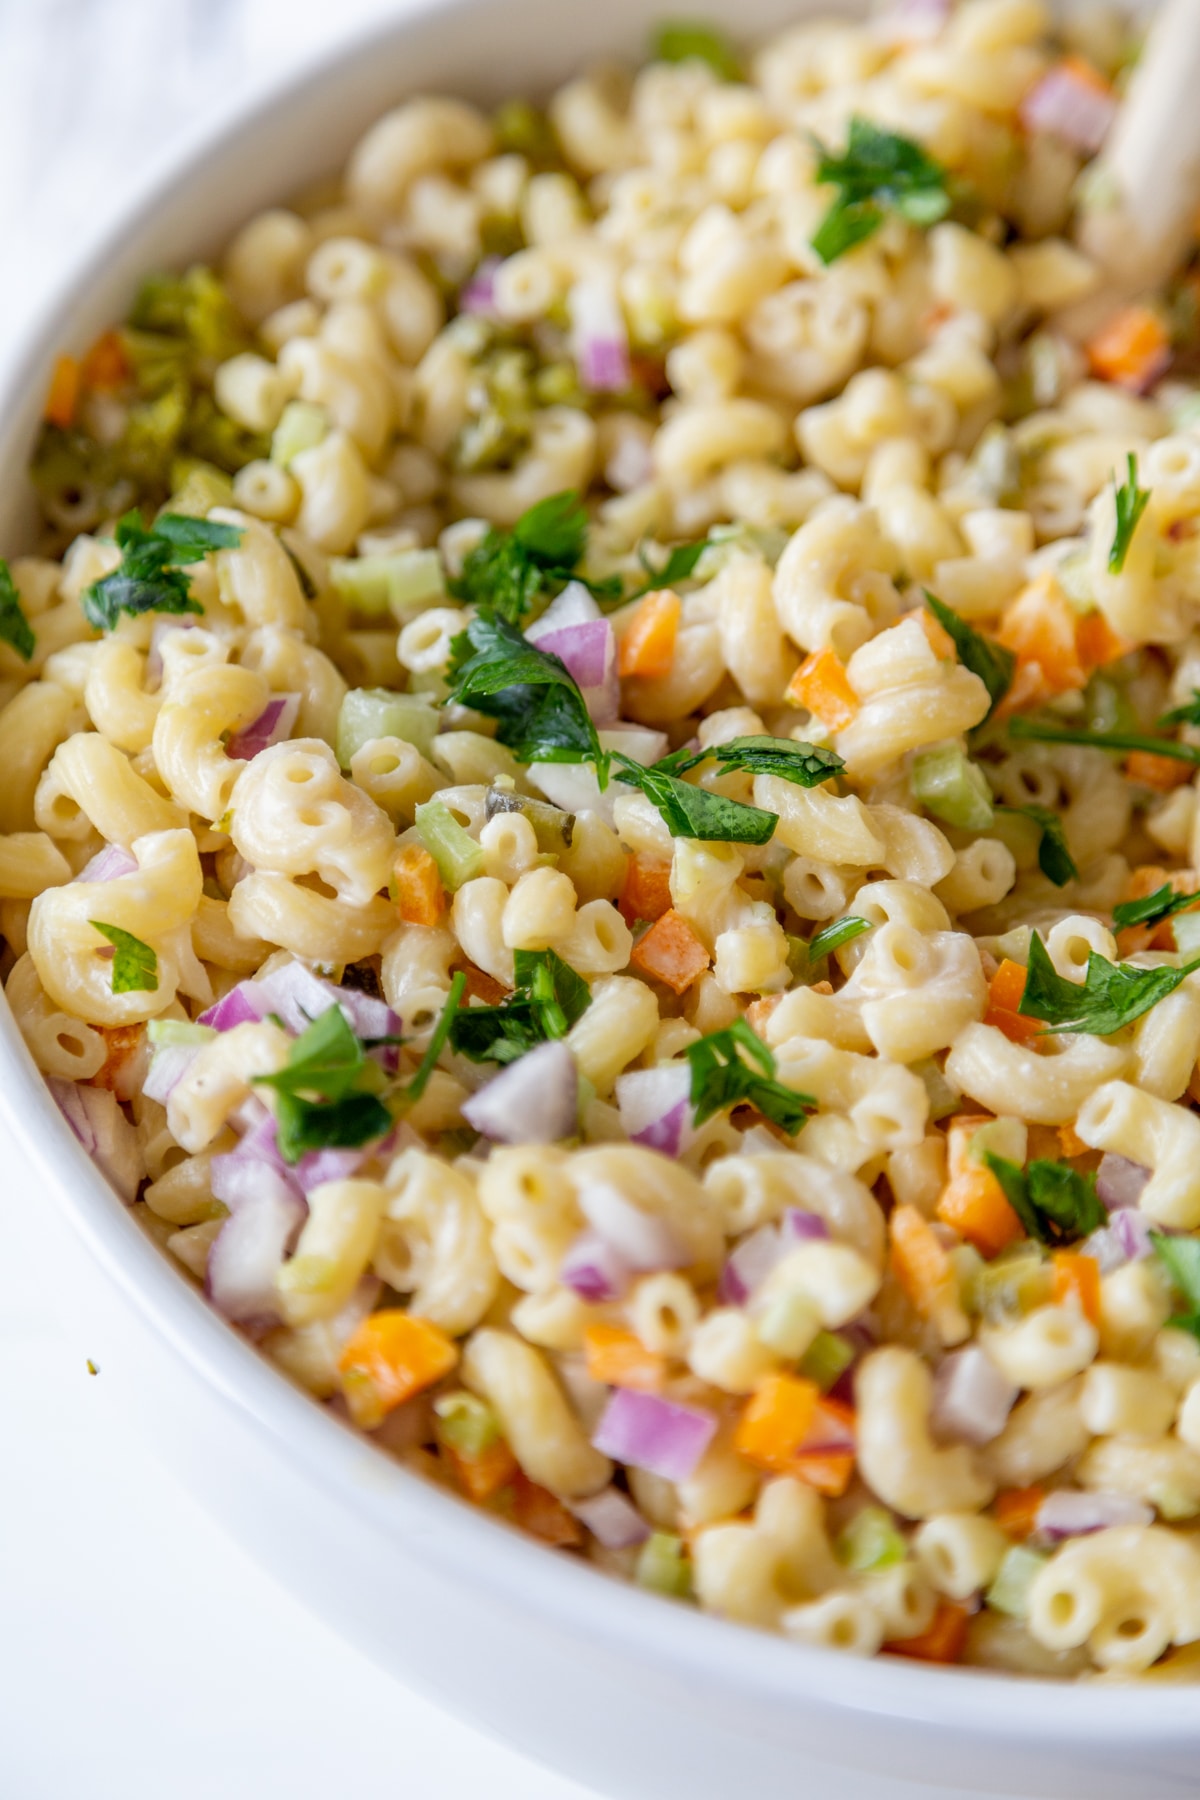 A white bowl filled with macaroni salad.